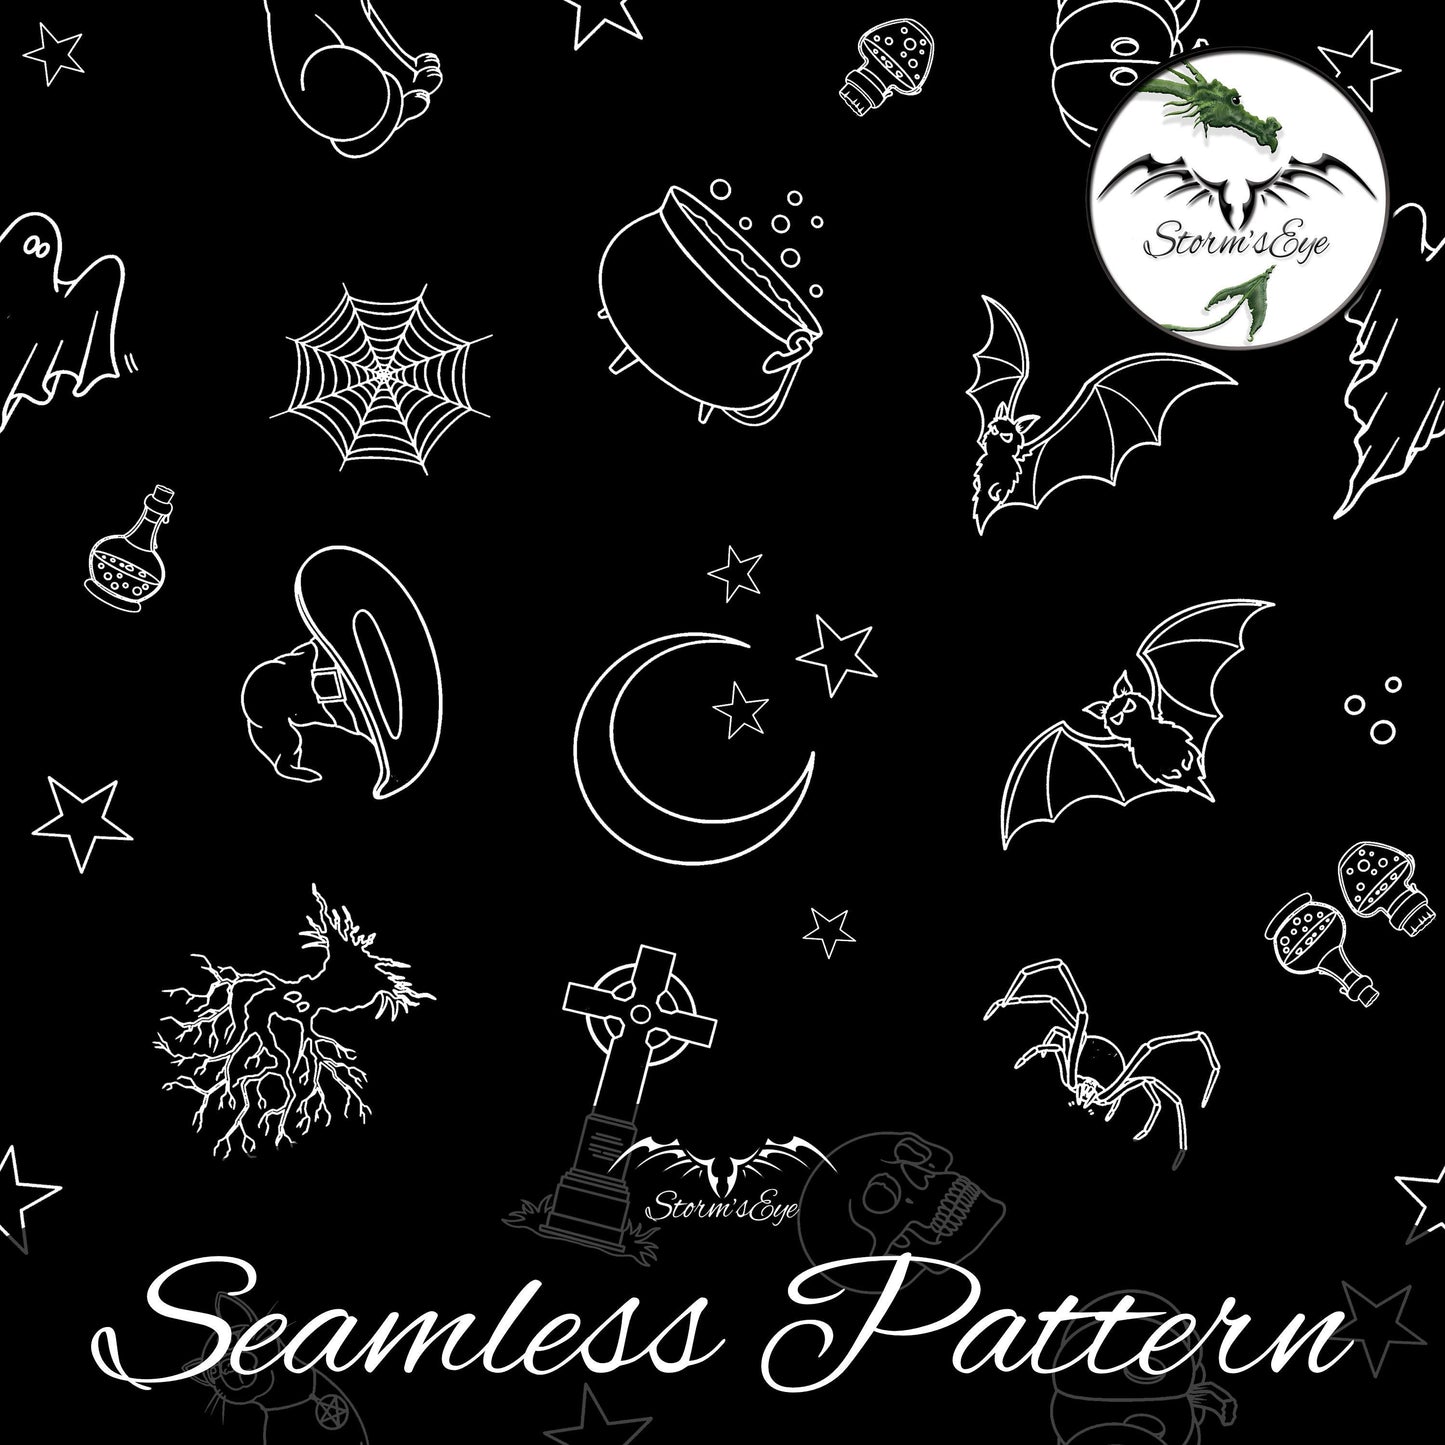 Halloween Vibe spooky seamless repeat pattern instant download by Stormseye Design